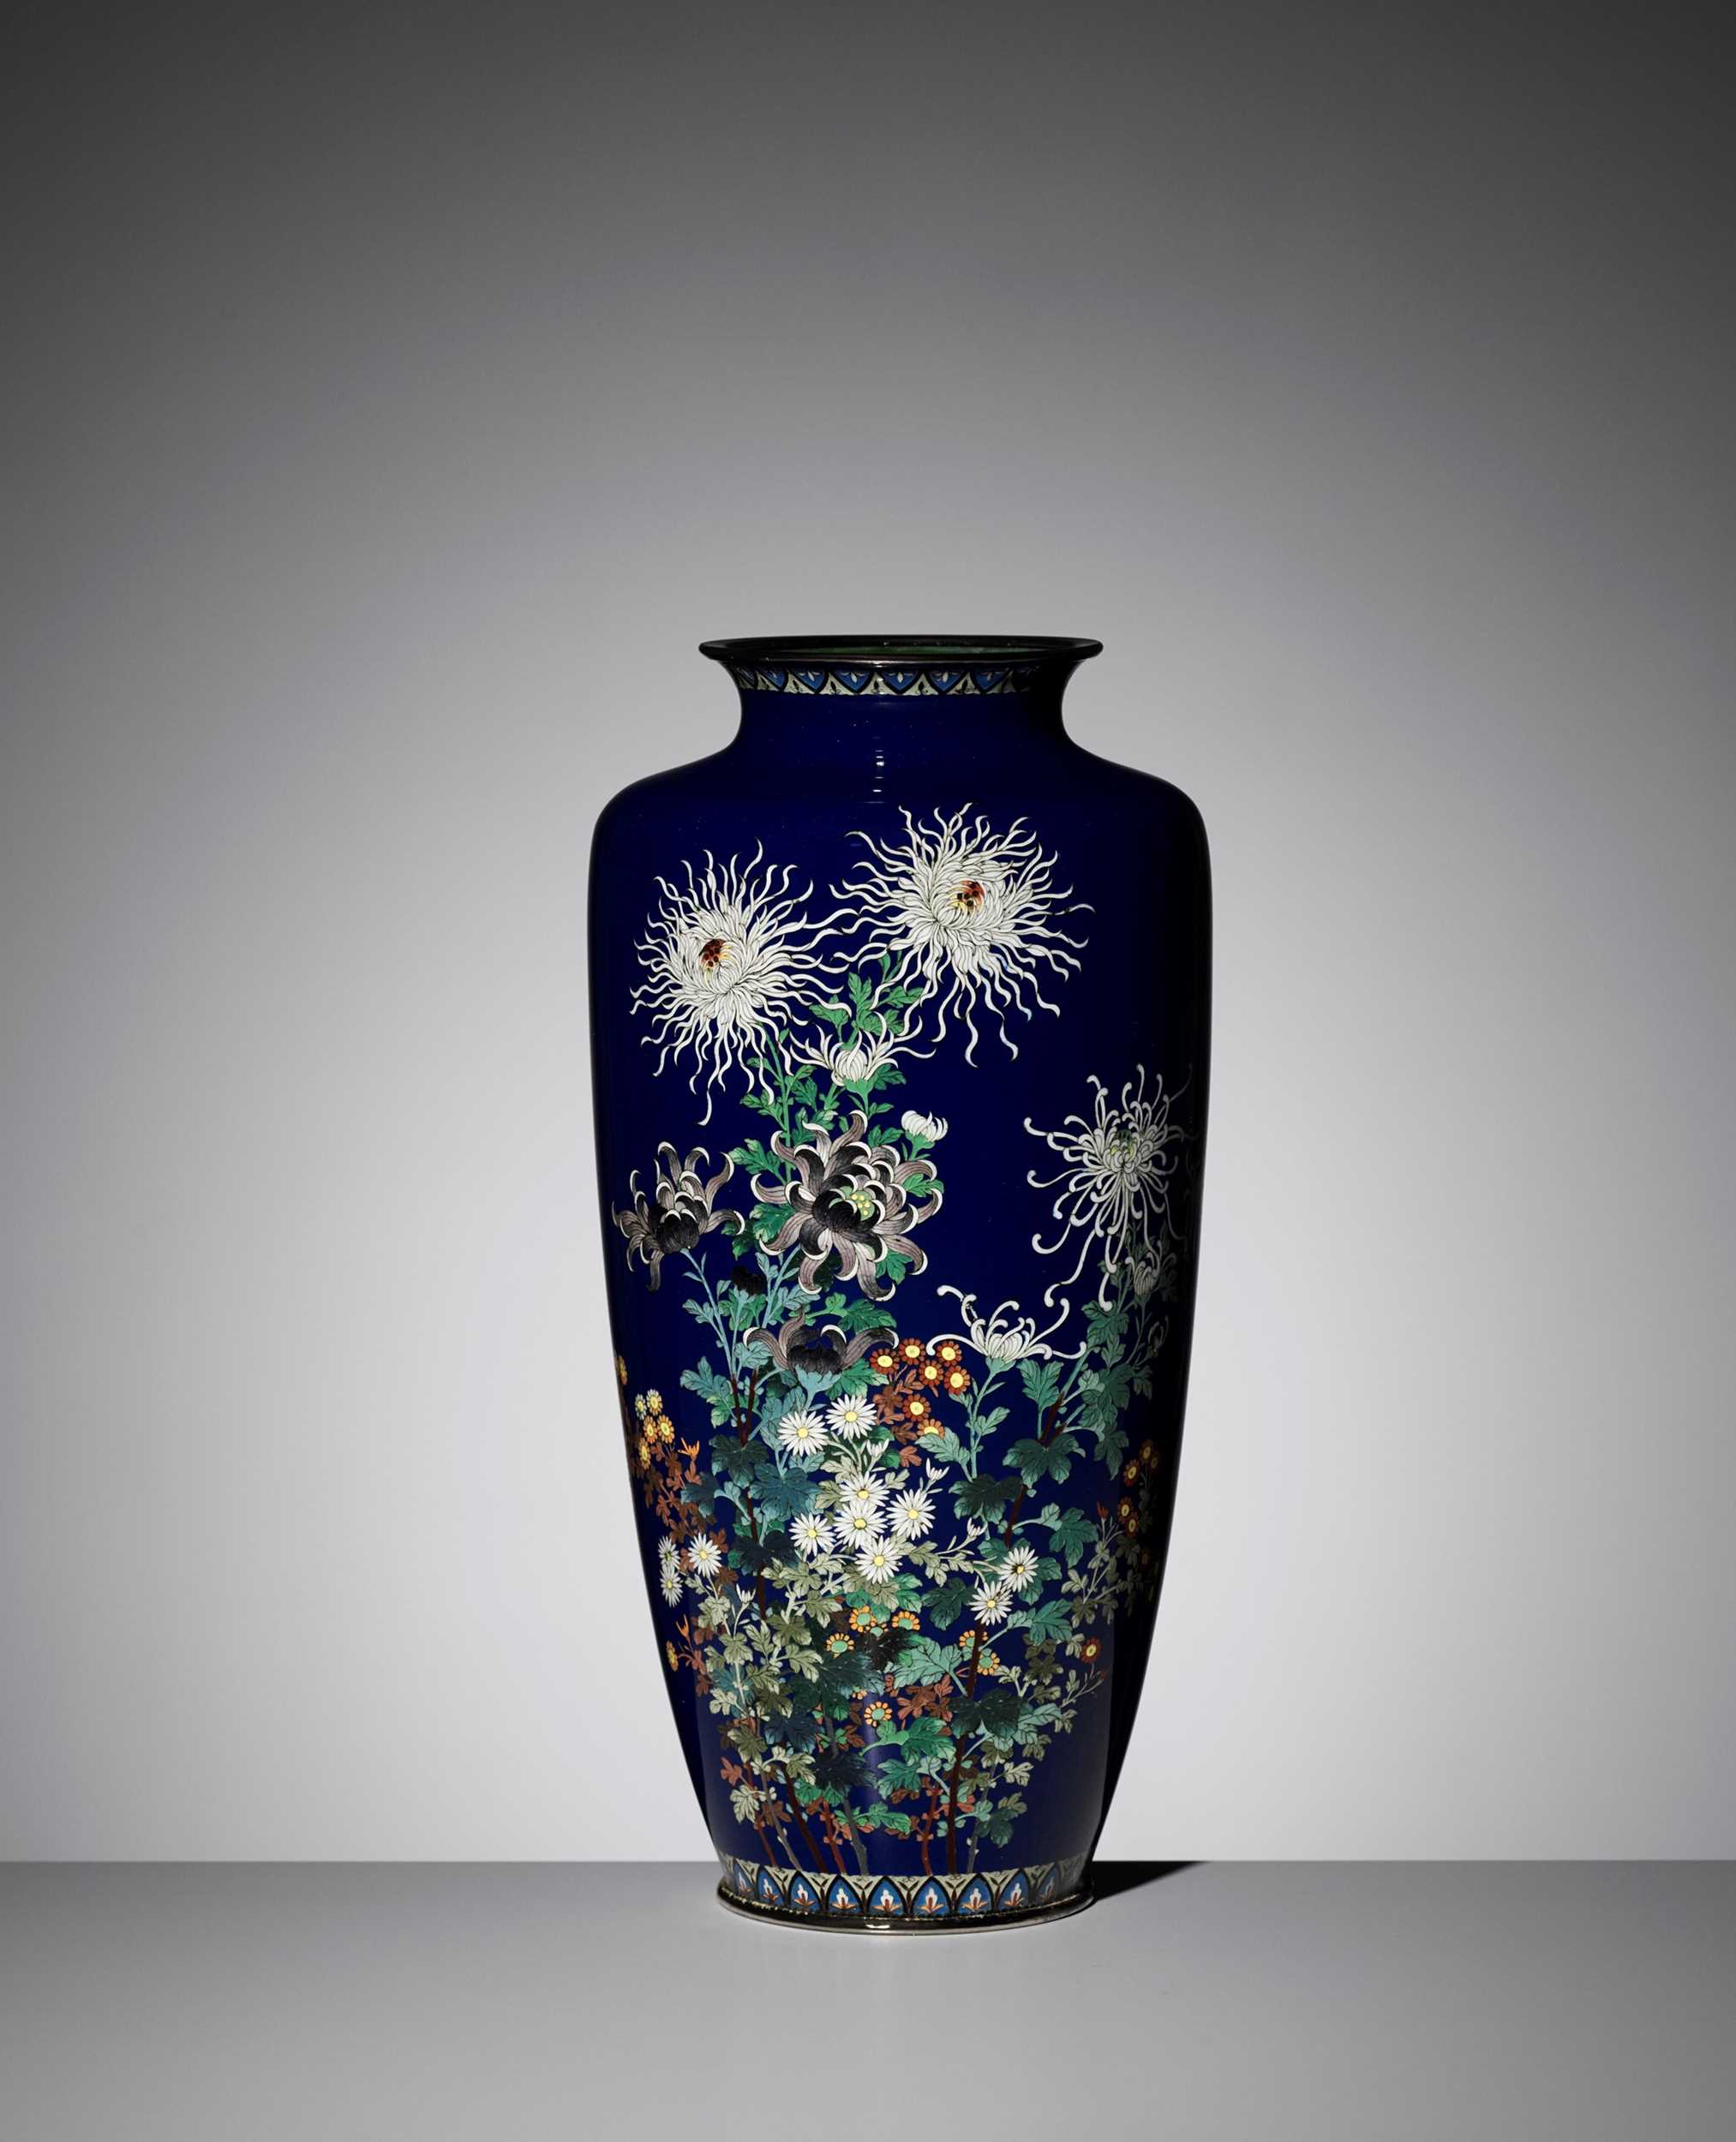 Lot 26 - A LARGE MIDNIGHT-BLUE CLOISONNÉ VASE WITH FLOWERS